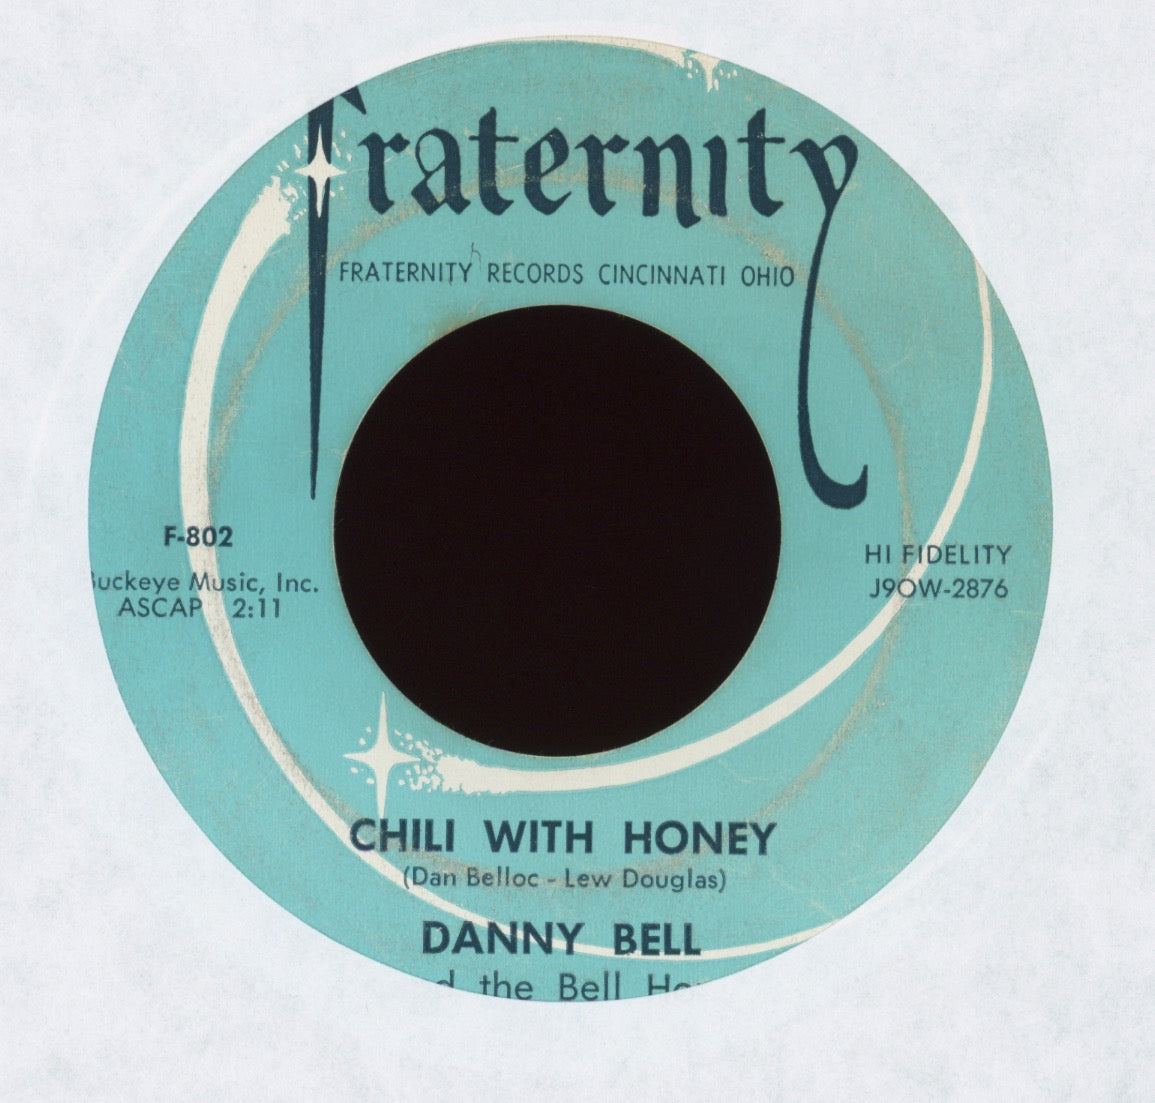 Danny Bell - Chili With Honey on Fraternity